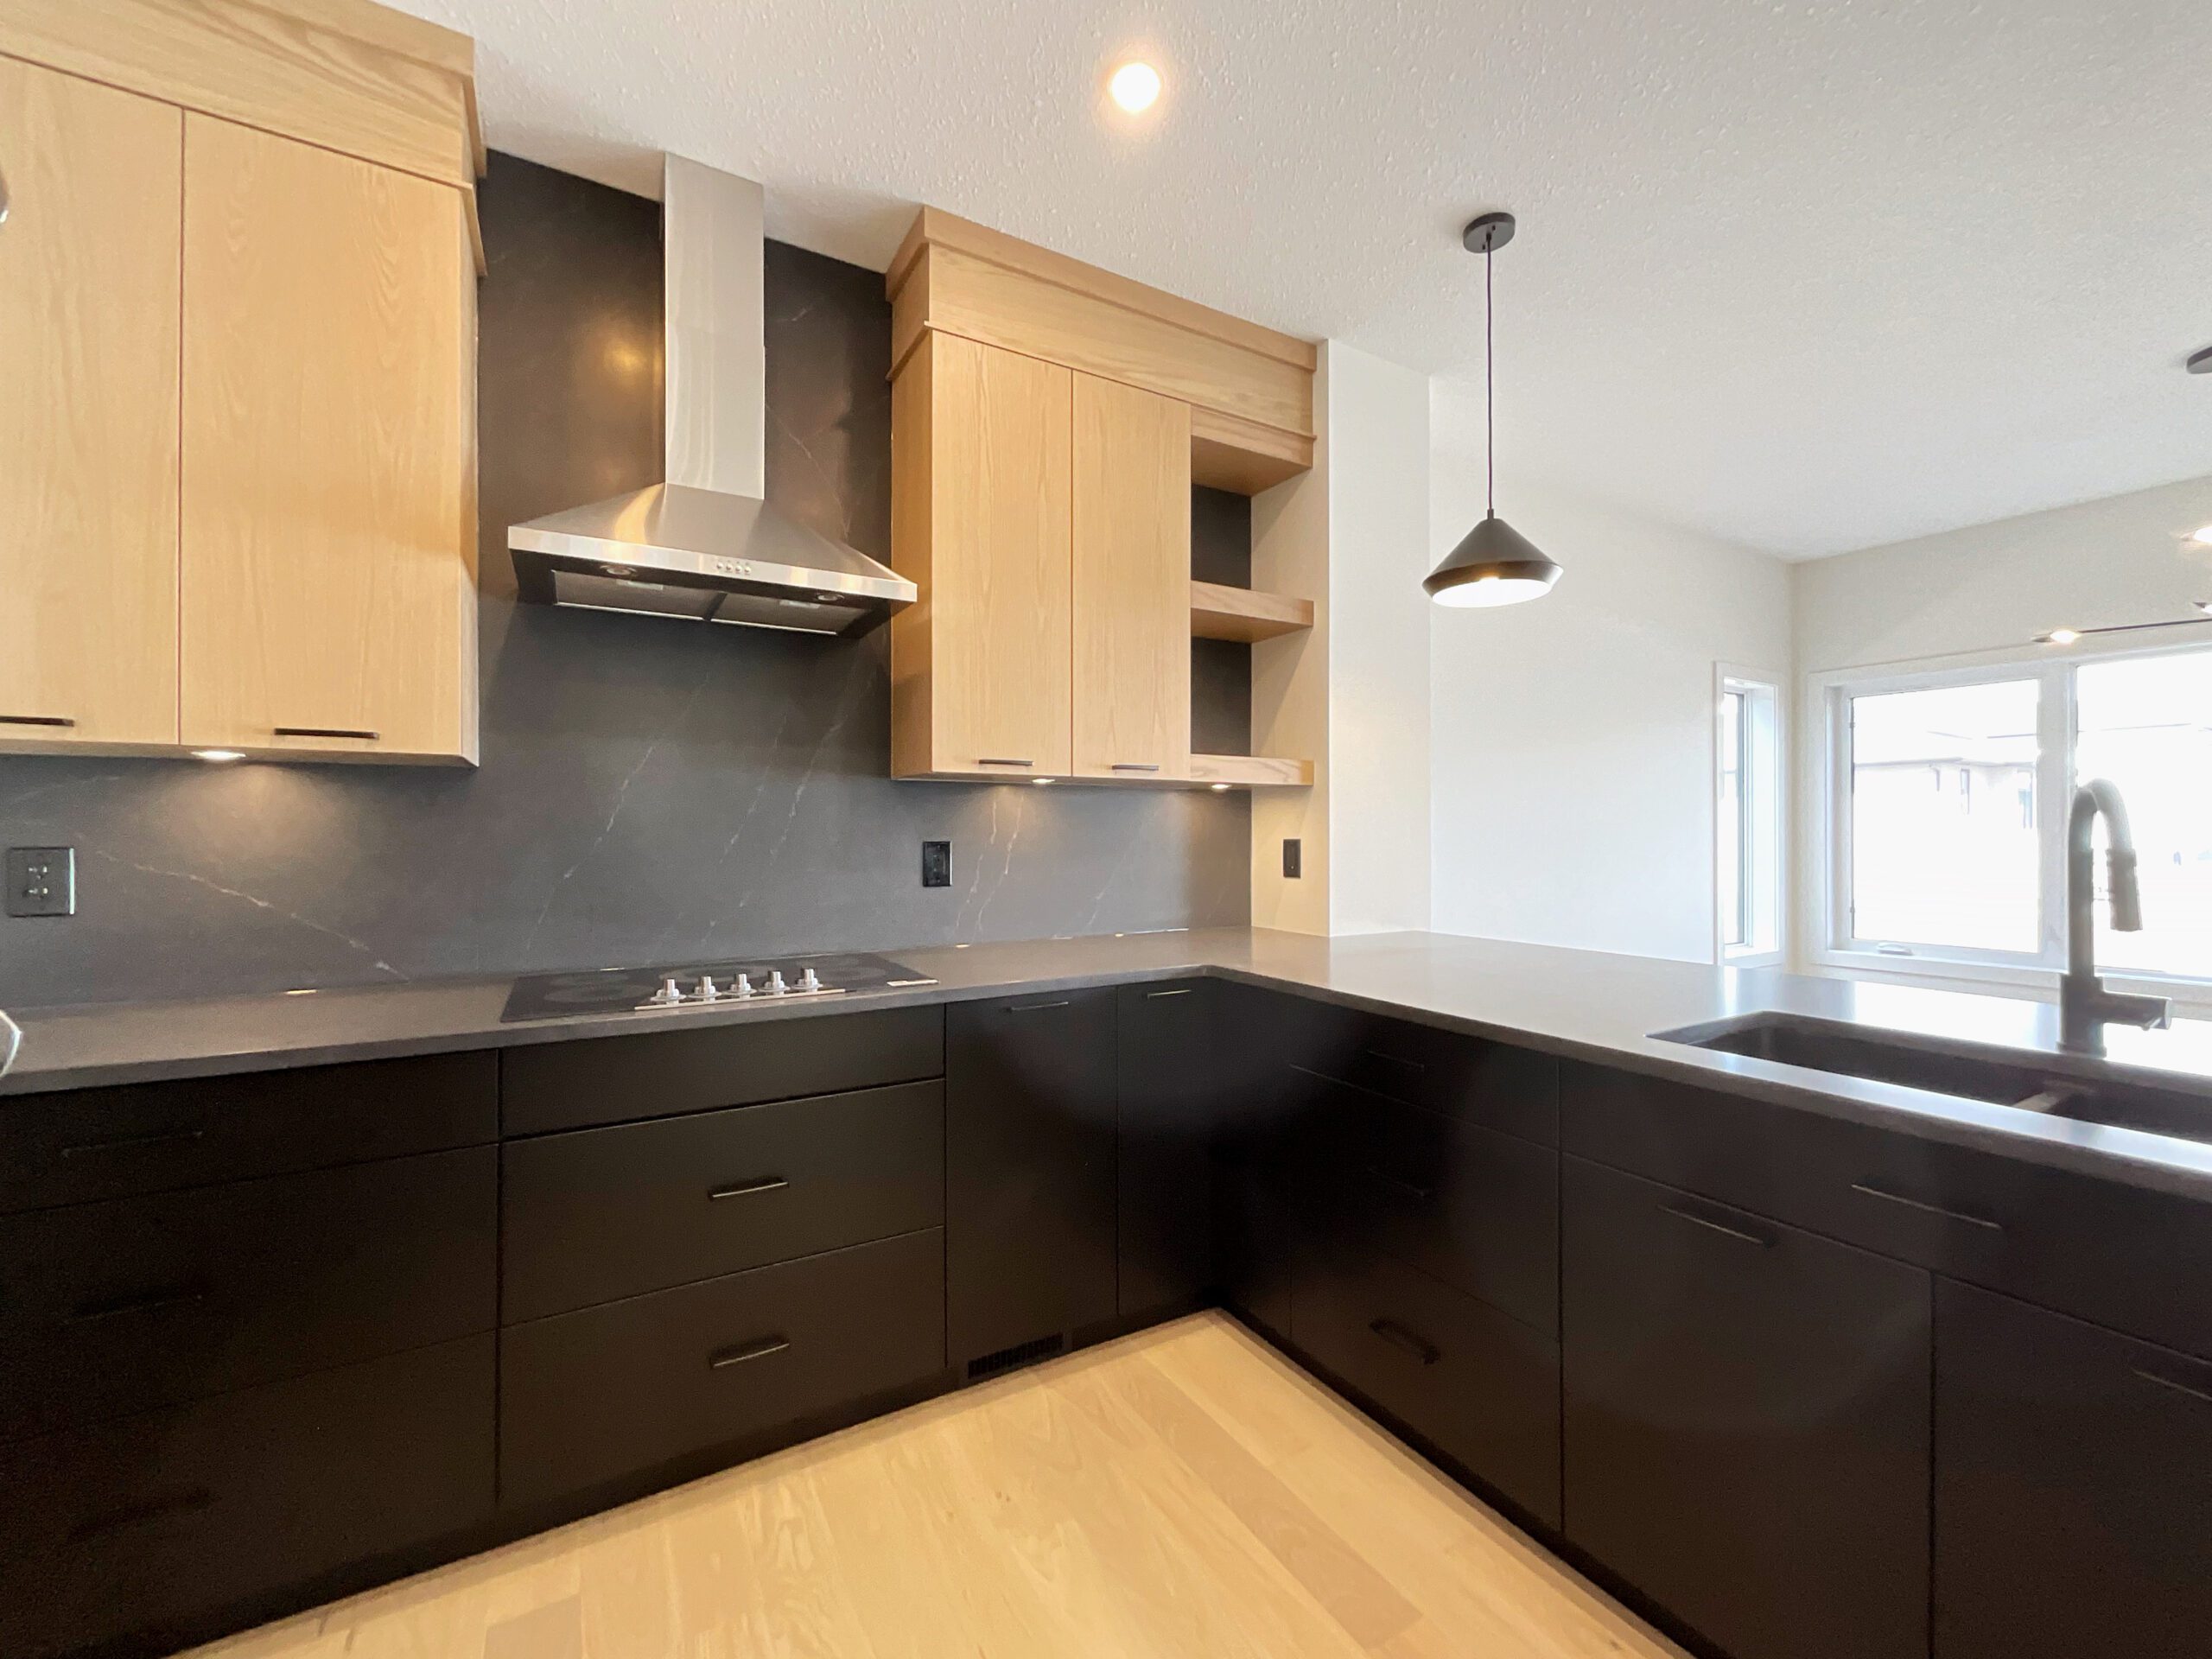 A kitchen with wooden upper cabinets and black lower cabinets with a marbled charcoal quartz counter tops which also serves as a backsplash which runs up the wall behind the range and range hood.